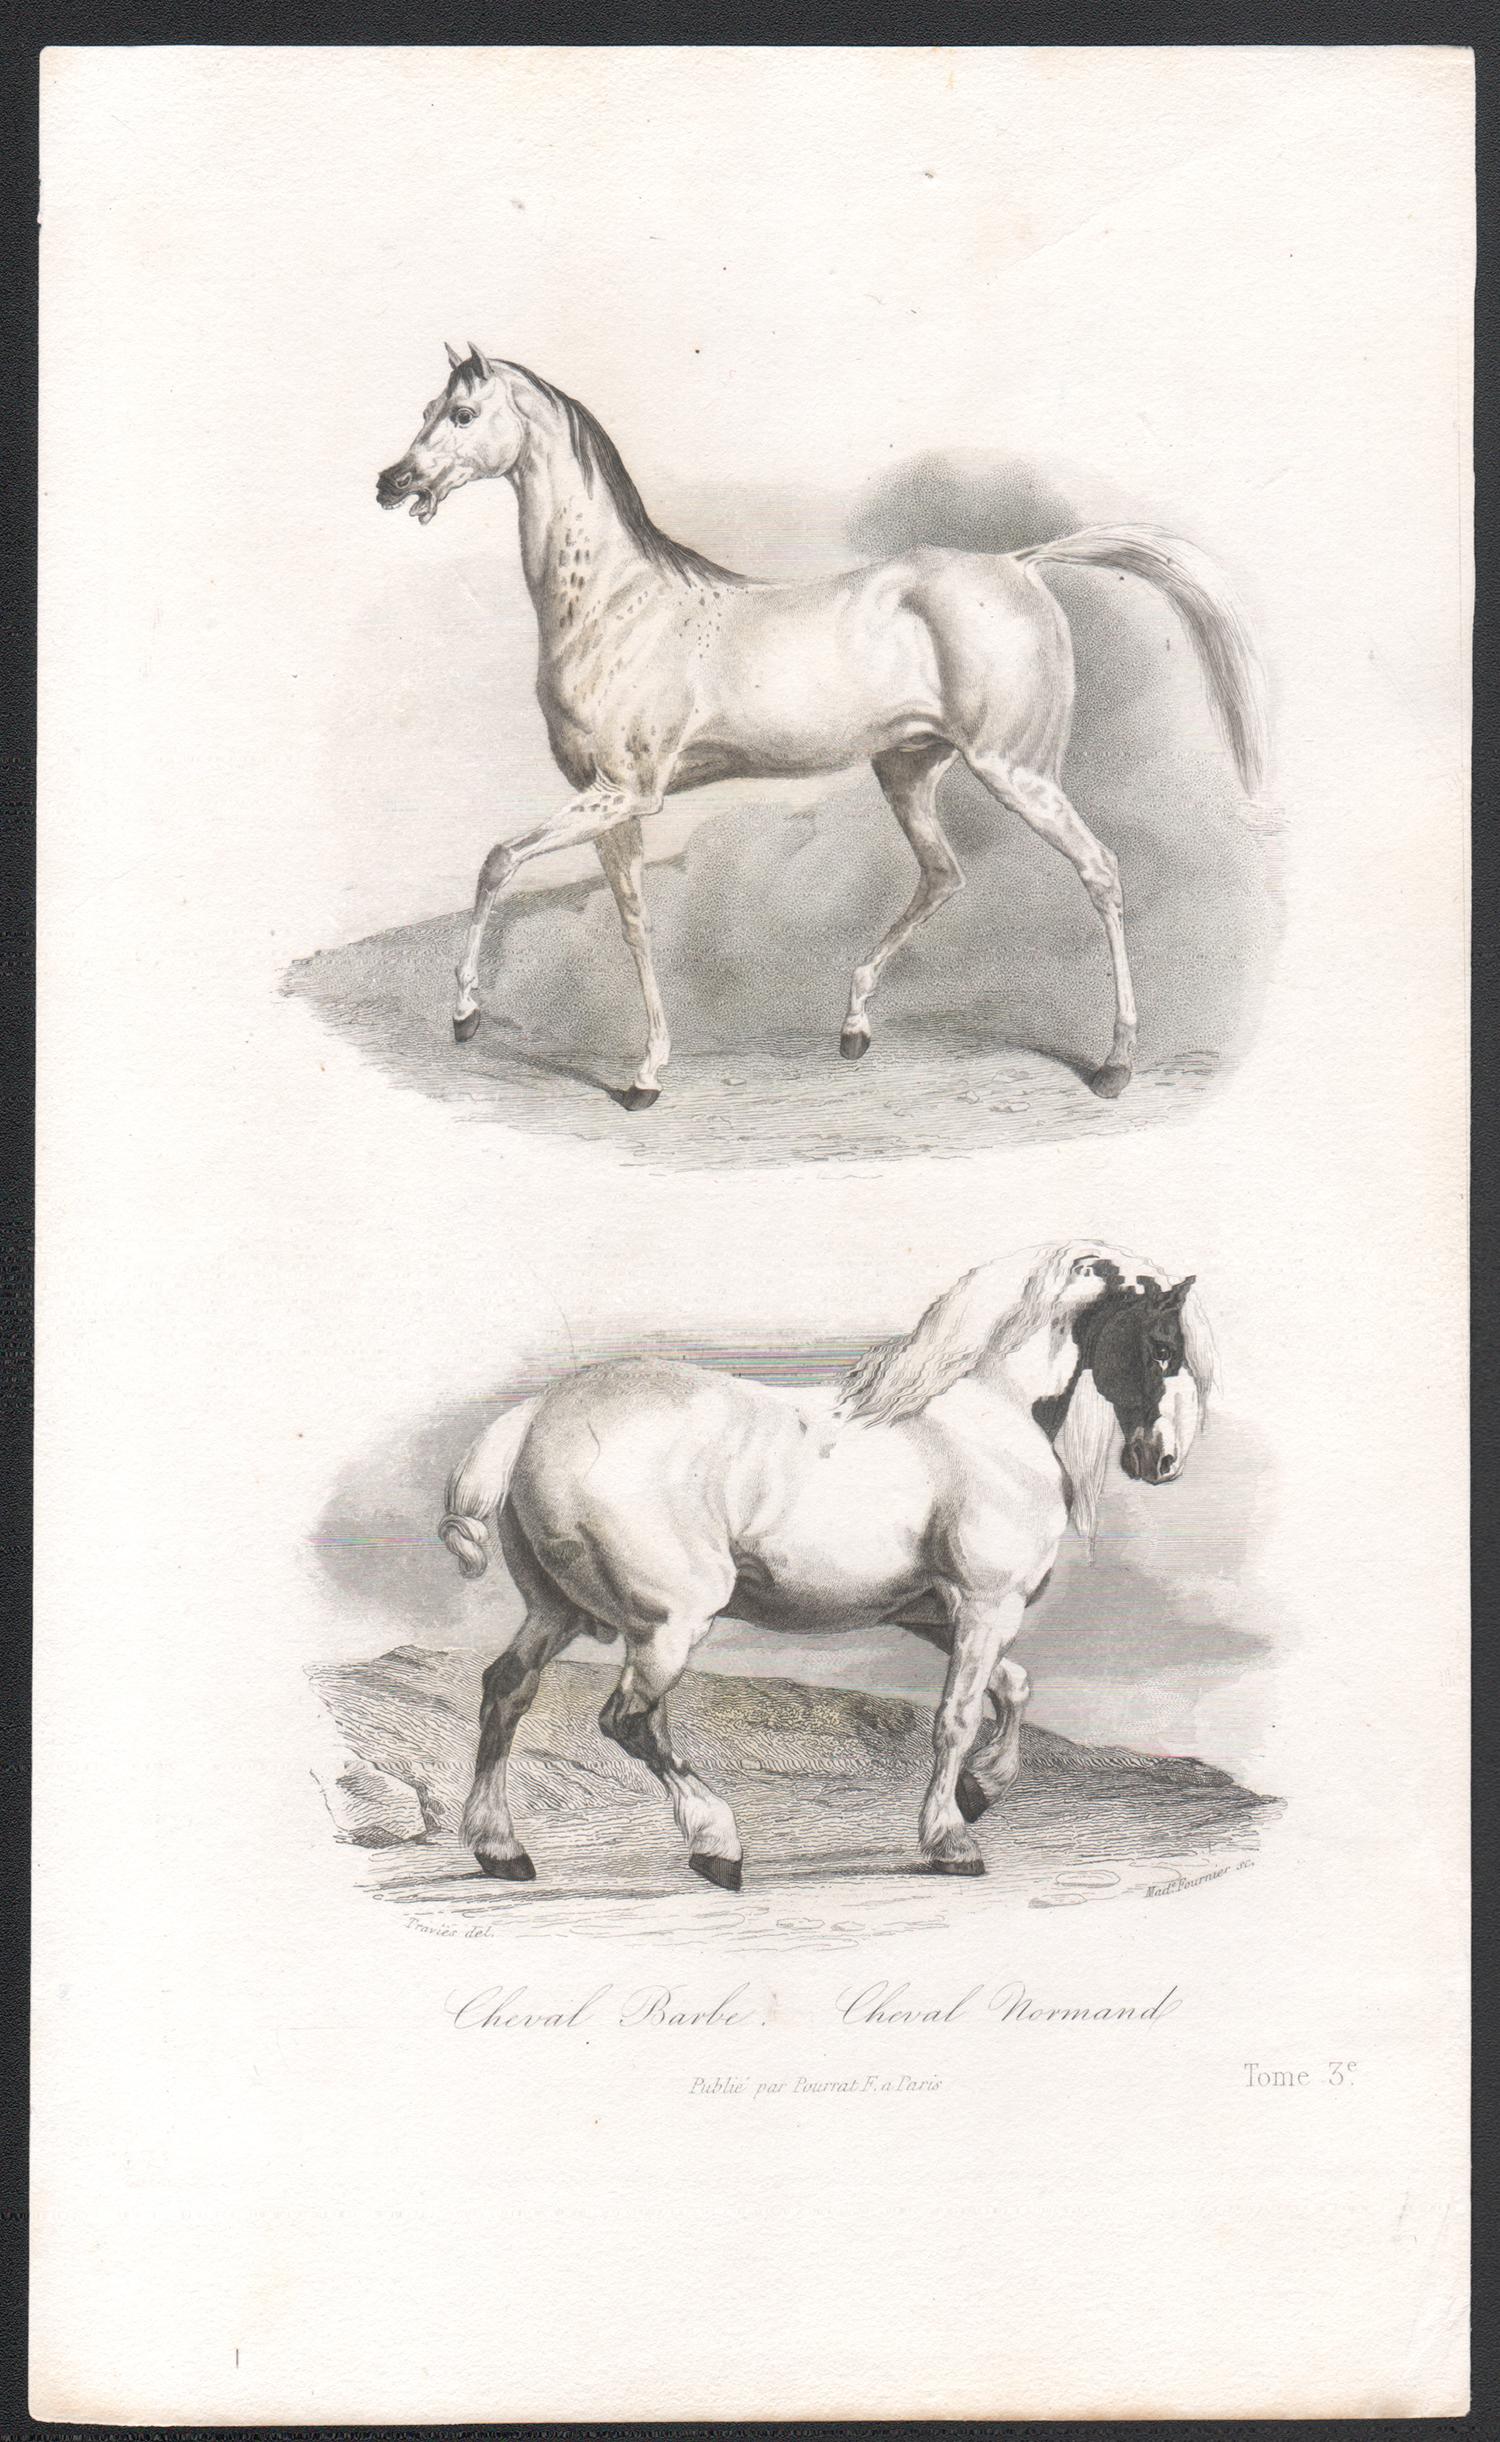 Horses, Antique French 19th century natural history engraving print - Print by Édouard Traviès 